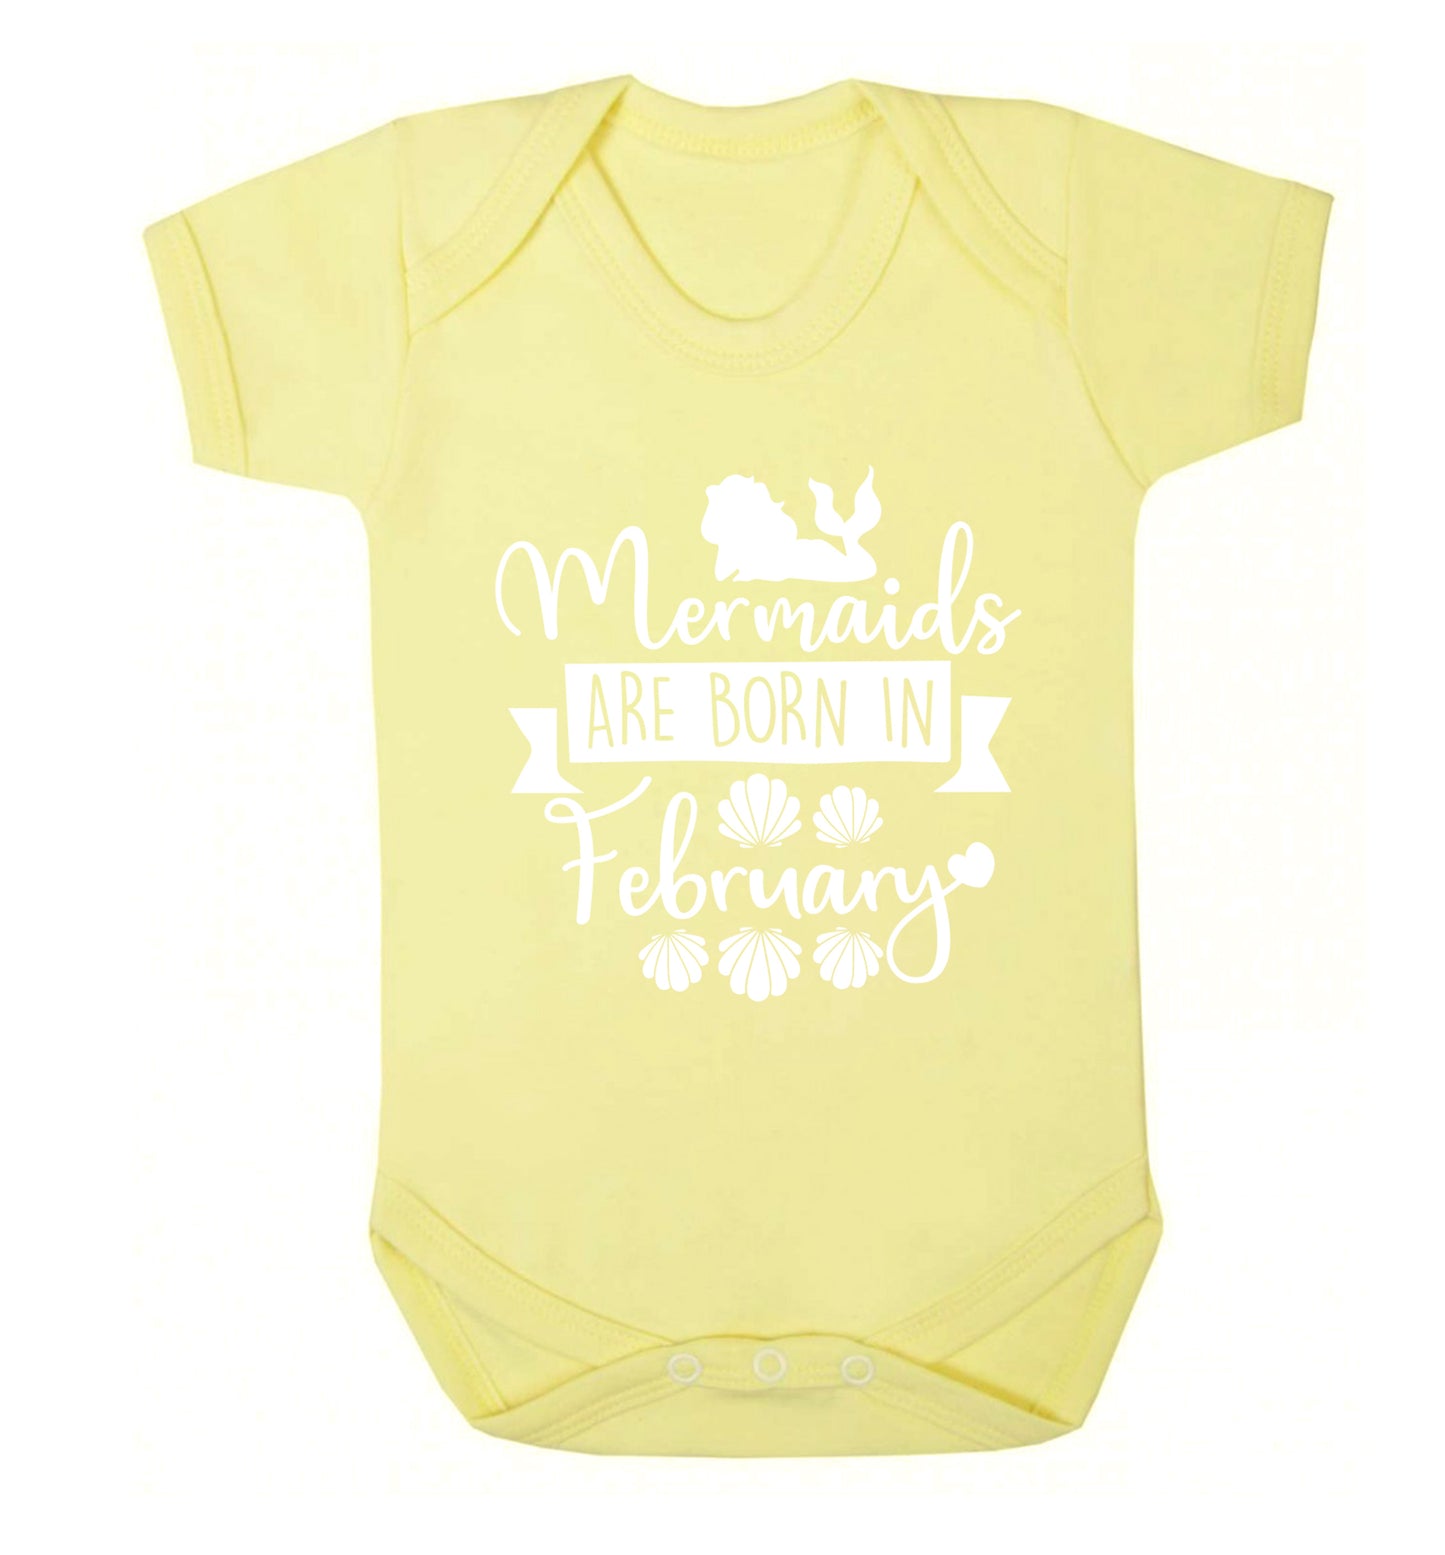 Mermaids are born in February Baby Vest pale yellow 18-24 months